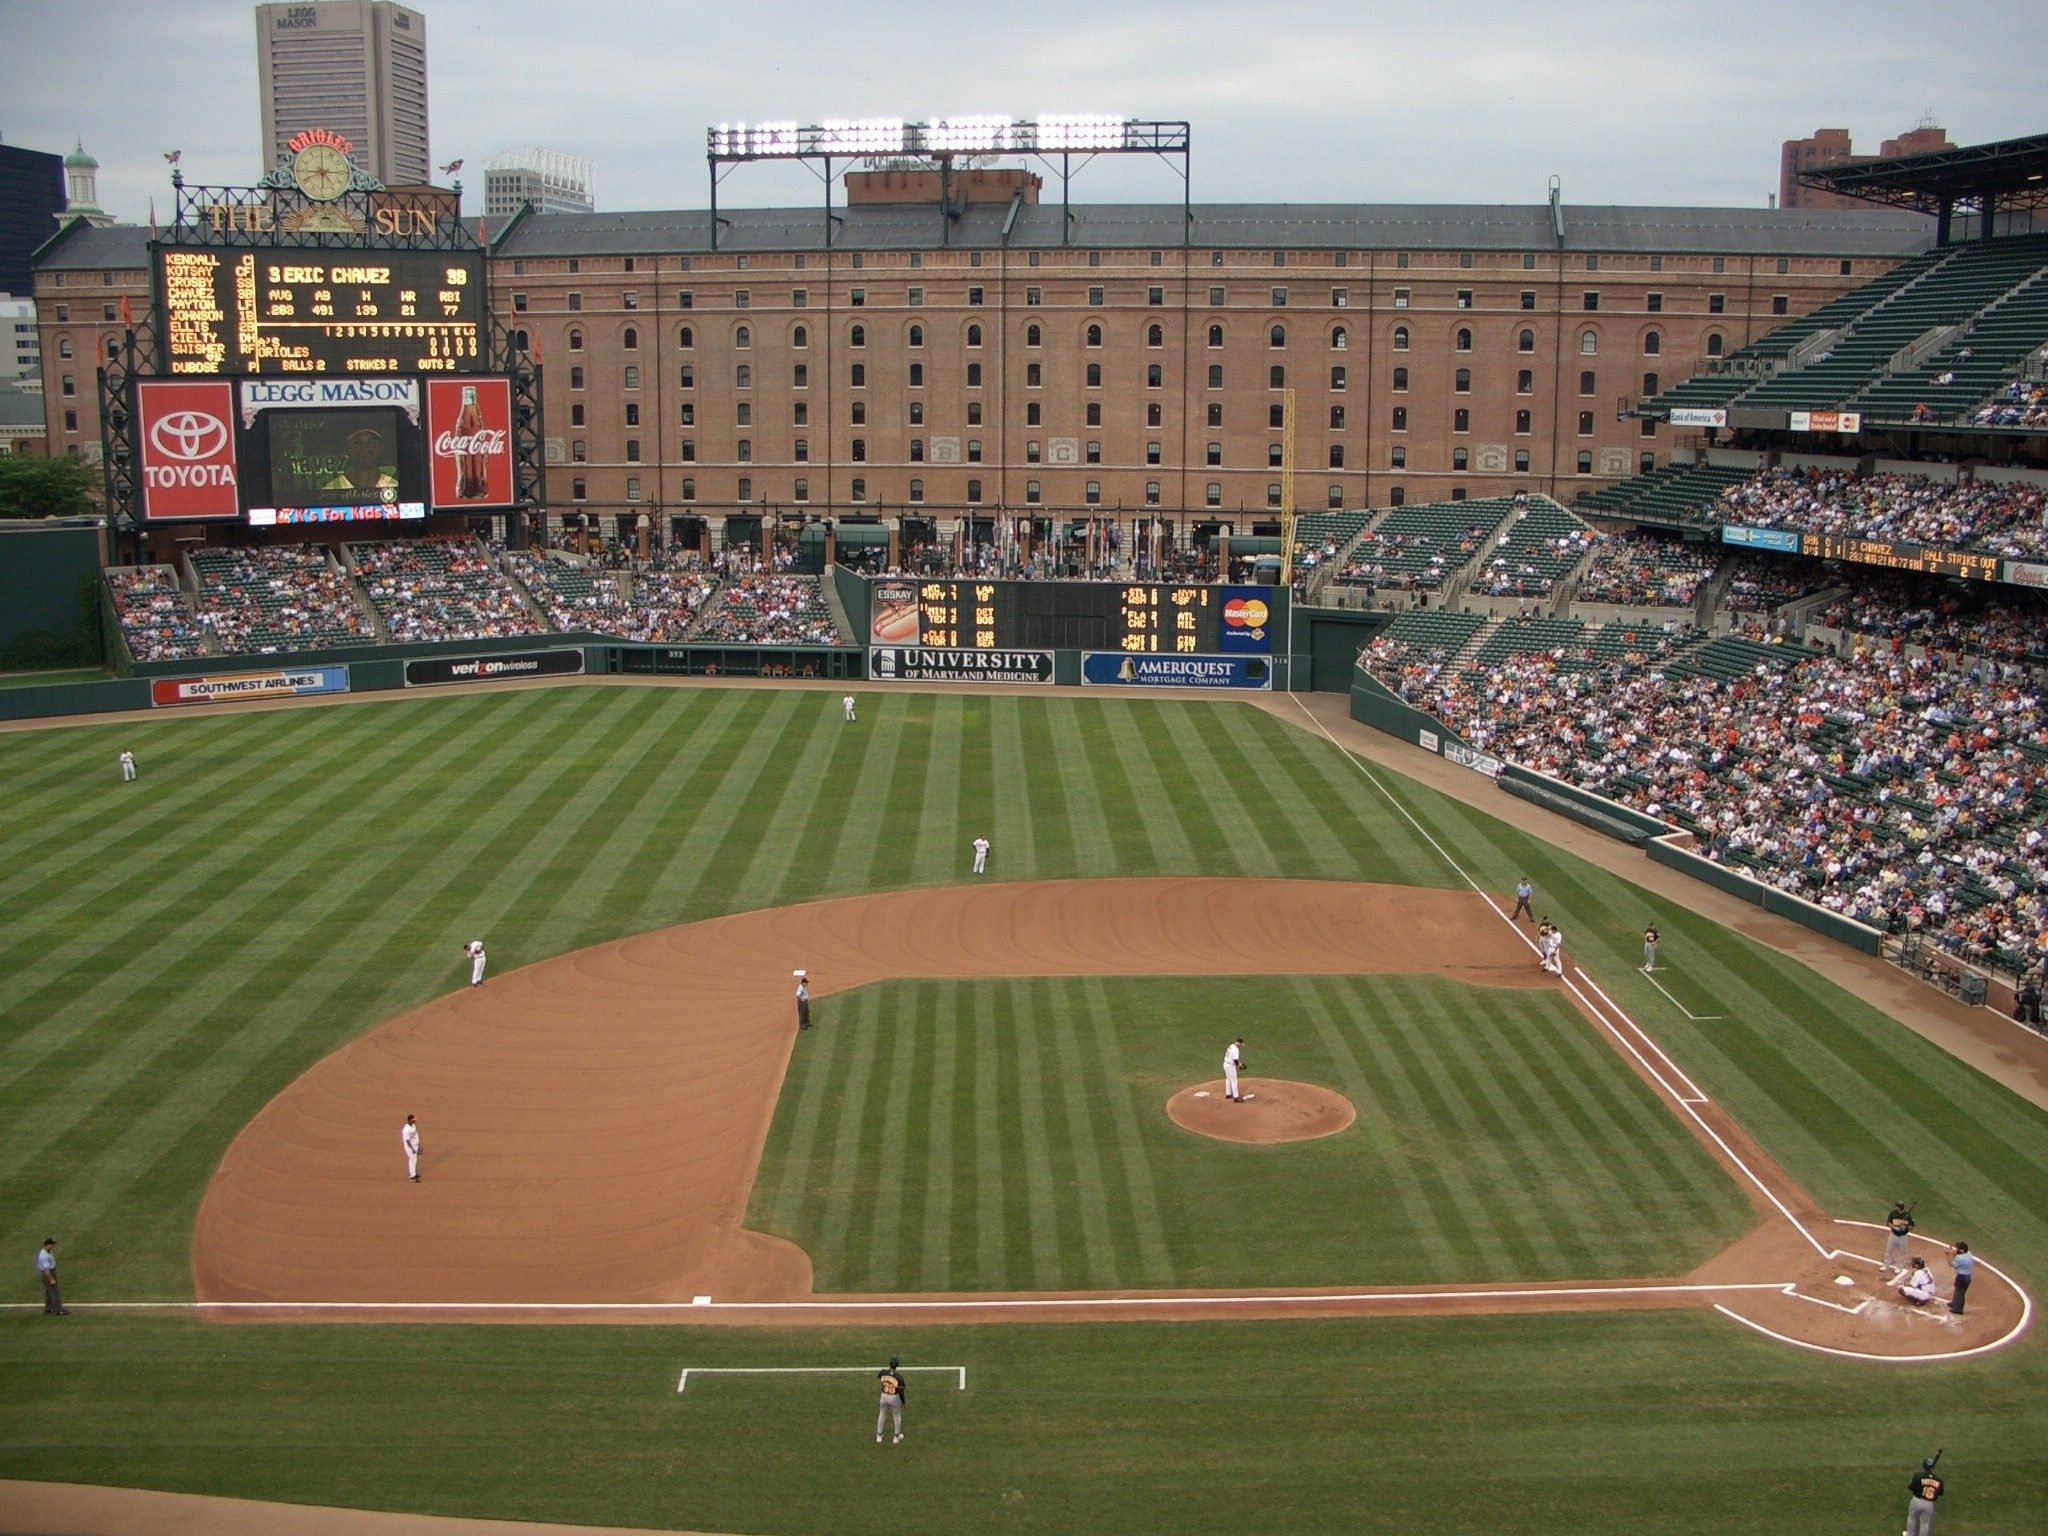 5. Oriole Park at Camden Yards - Baltimore, Maryland; home of the Orioles.